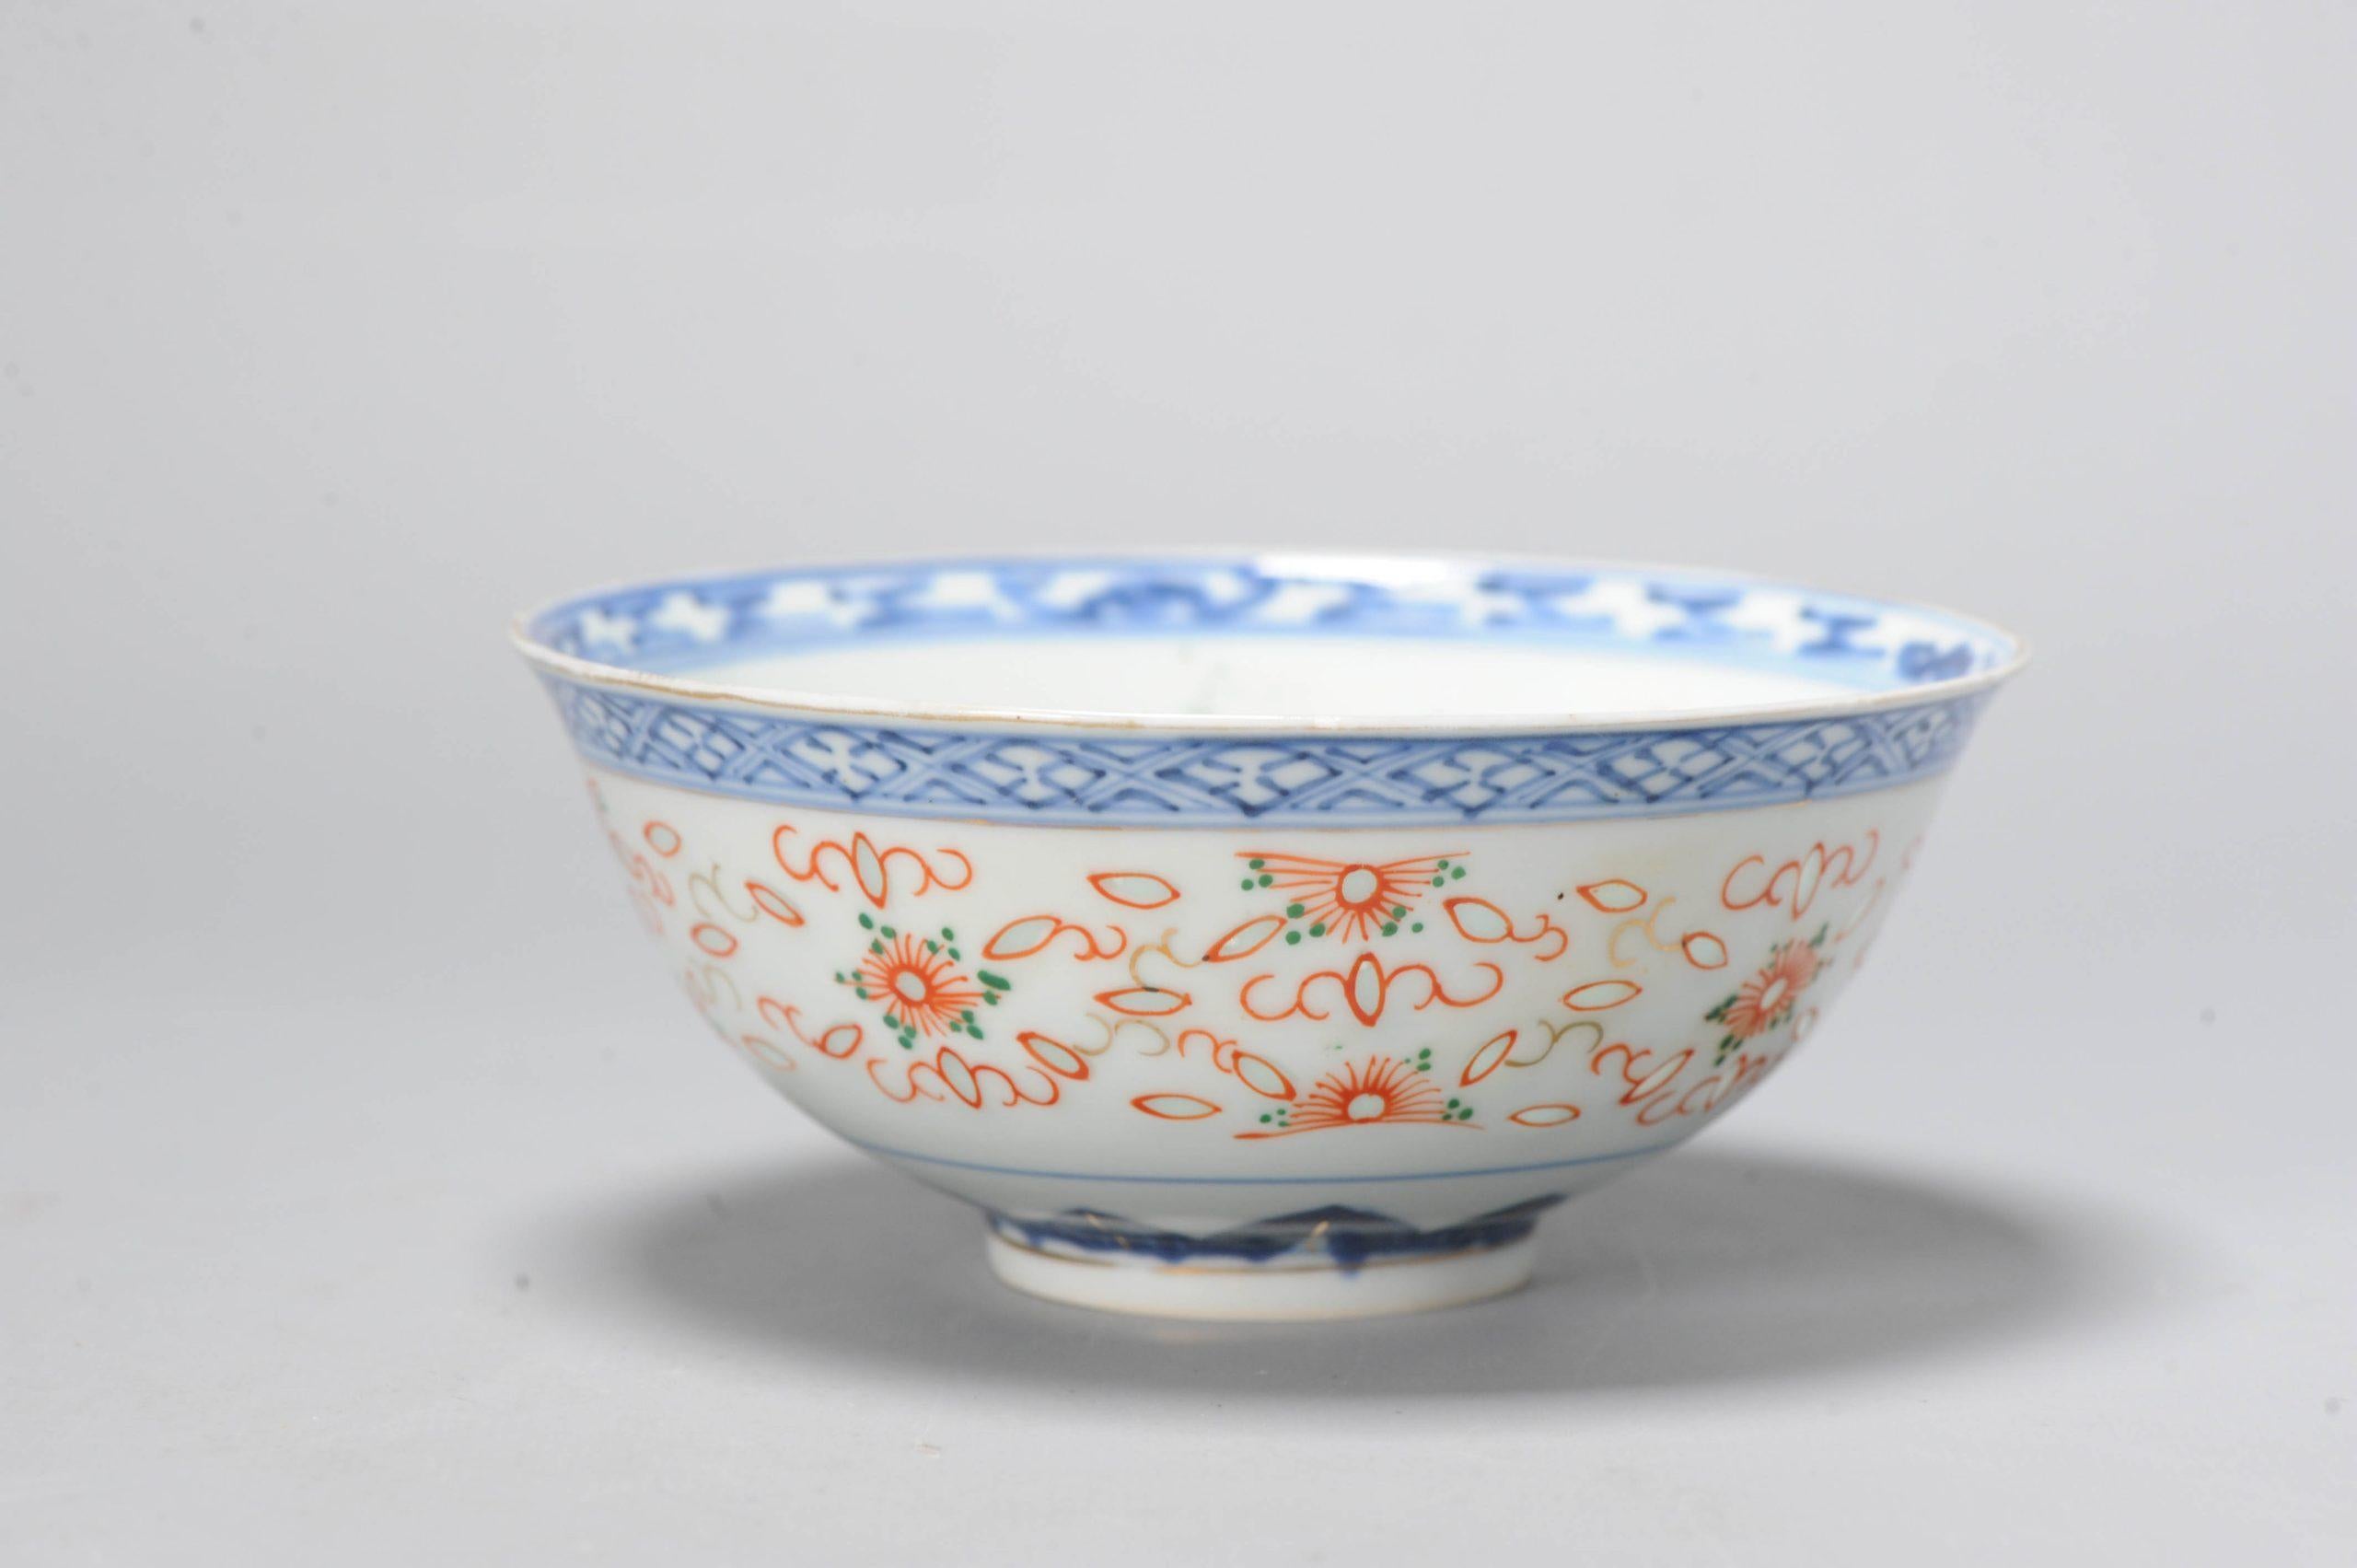 Lovely Chinese porcelain bowl. Early 20th Century.

Additional information:
Material: Porcelain & Pottery
Type: Bowls
Region of Origin: China
Period: 20th century Republic / Minguo (1912 - 1949)
Condition: 1 line and fritting to rim.
Dimension: Ø